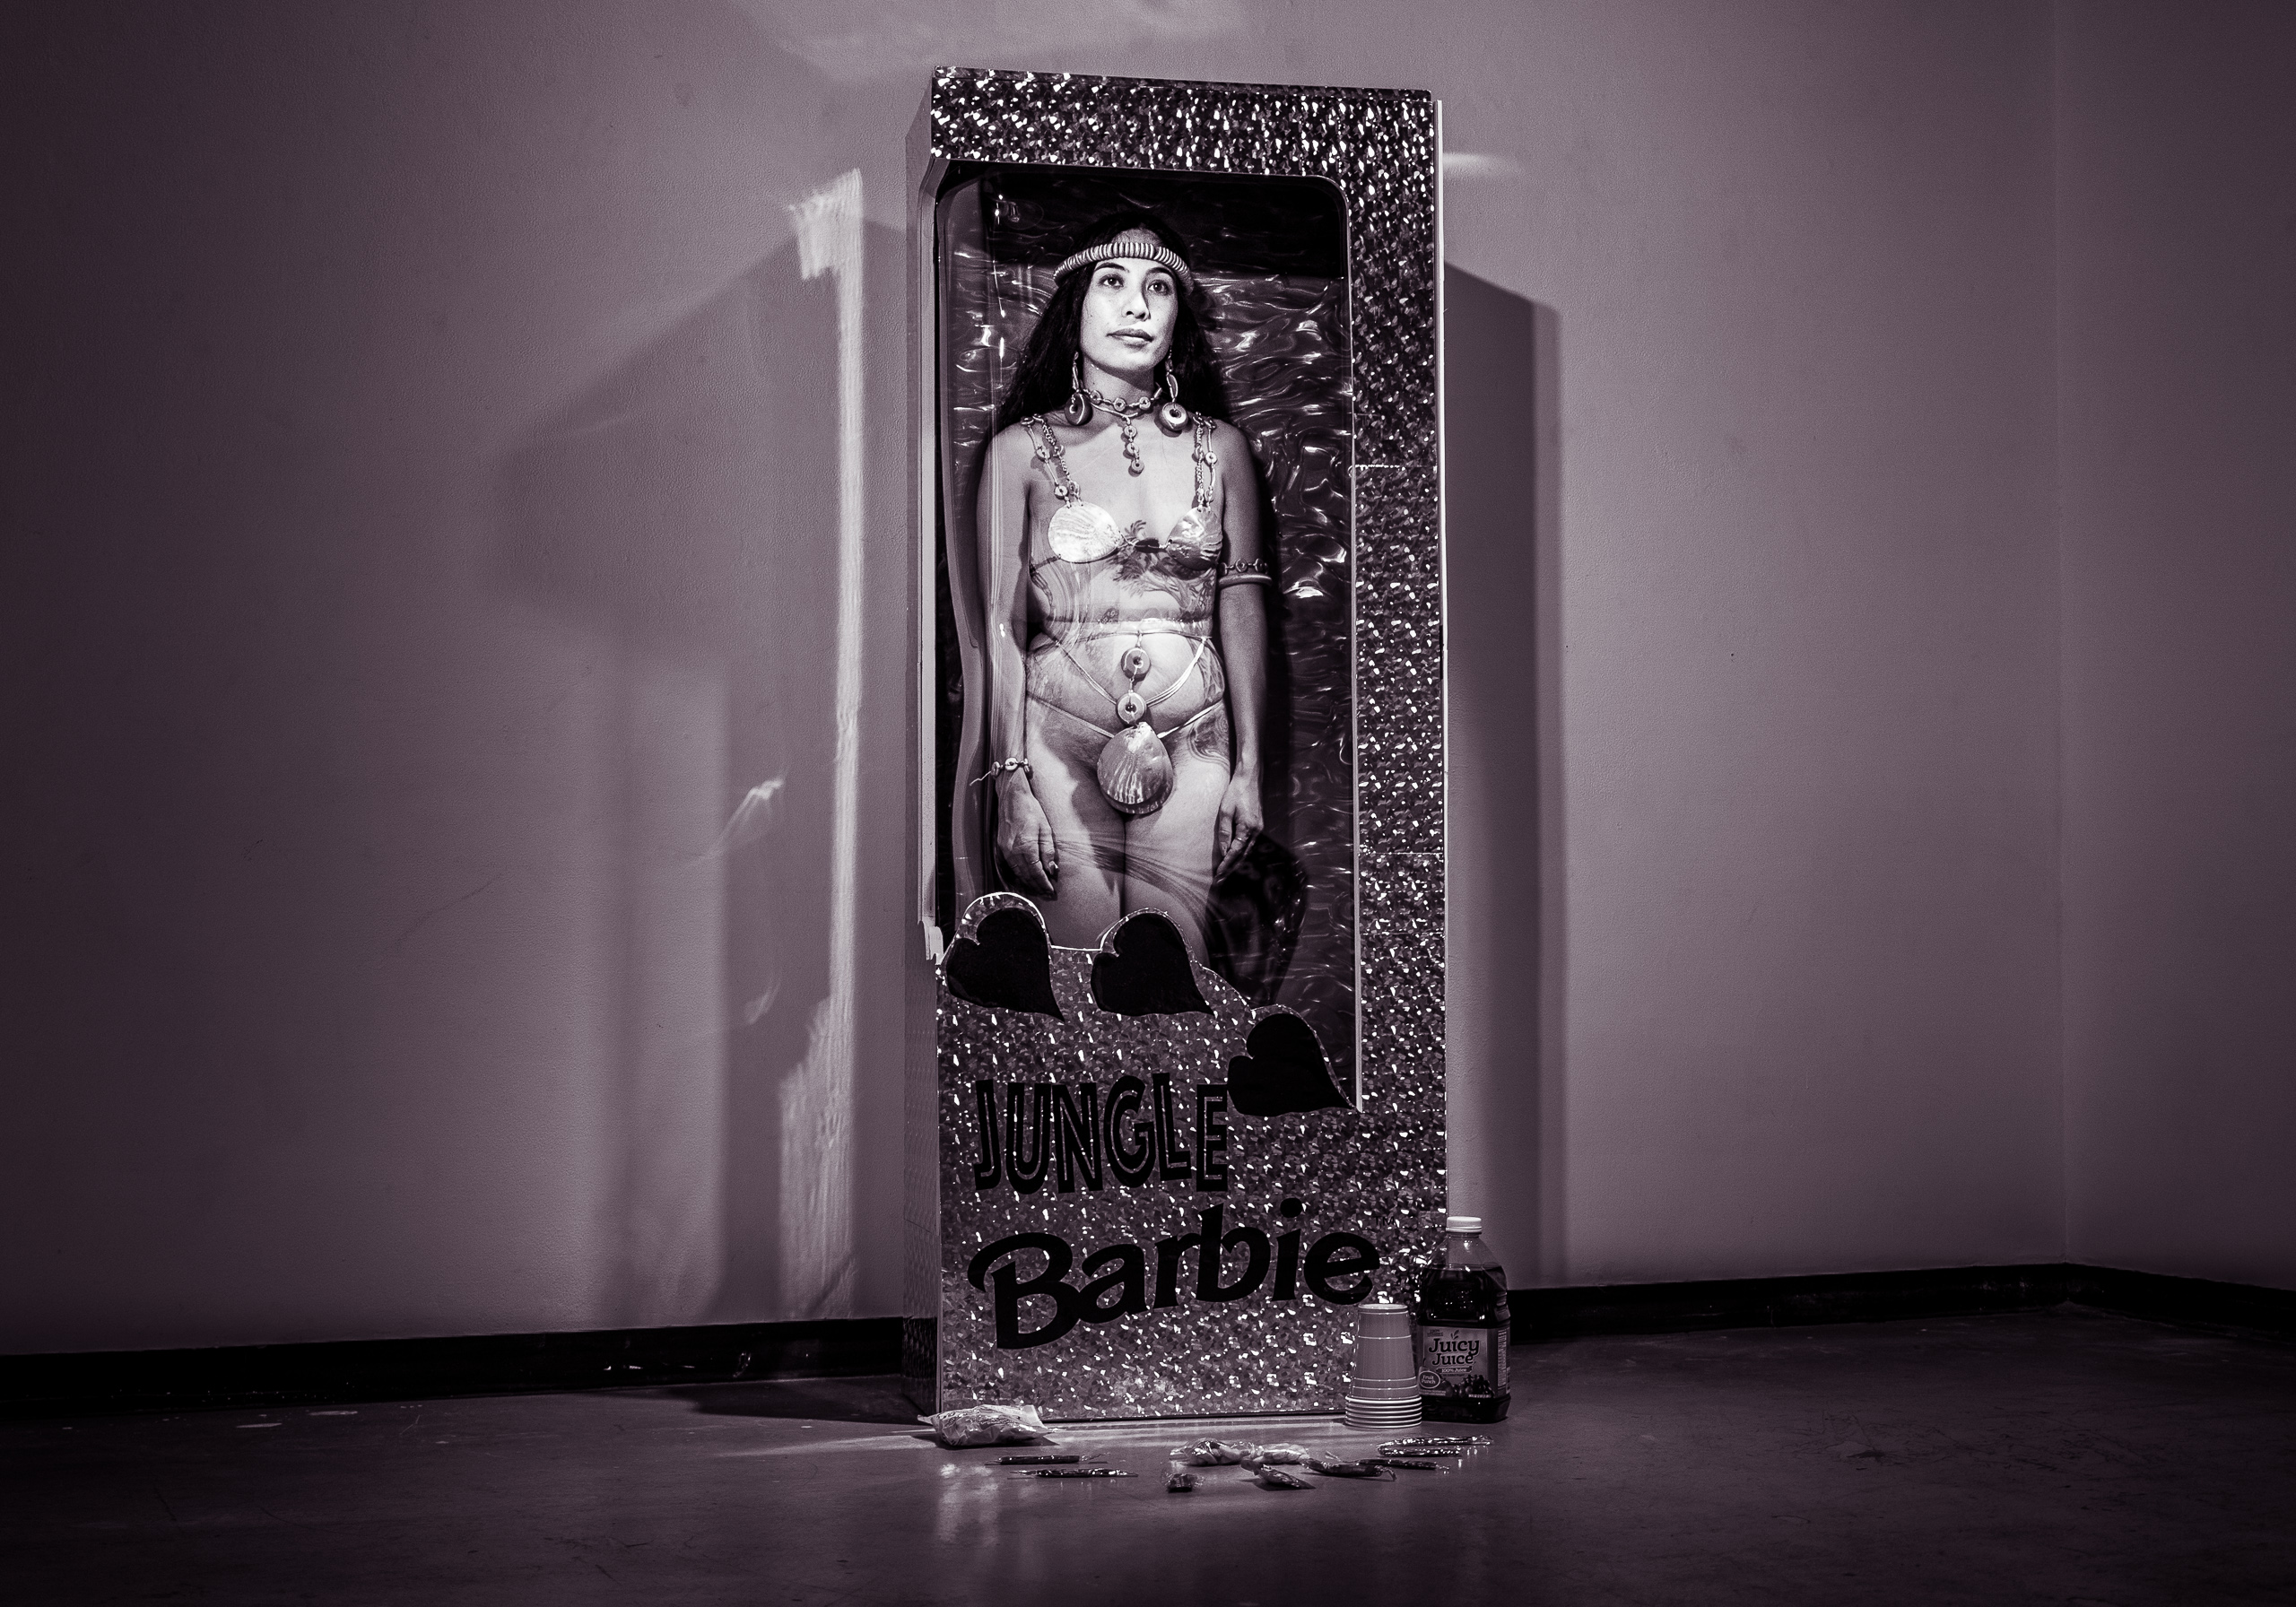 A durational performance by performance artist Lia Gogue performing "Jungle Barbie". Gogue is dressed in a "native" or "jungle" costume and stands inside a life-size "Barbie Box" complete with plastic straps holding the "Barbie Doll" in the box. 